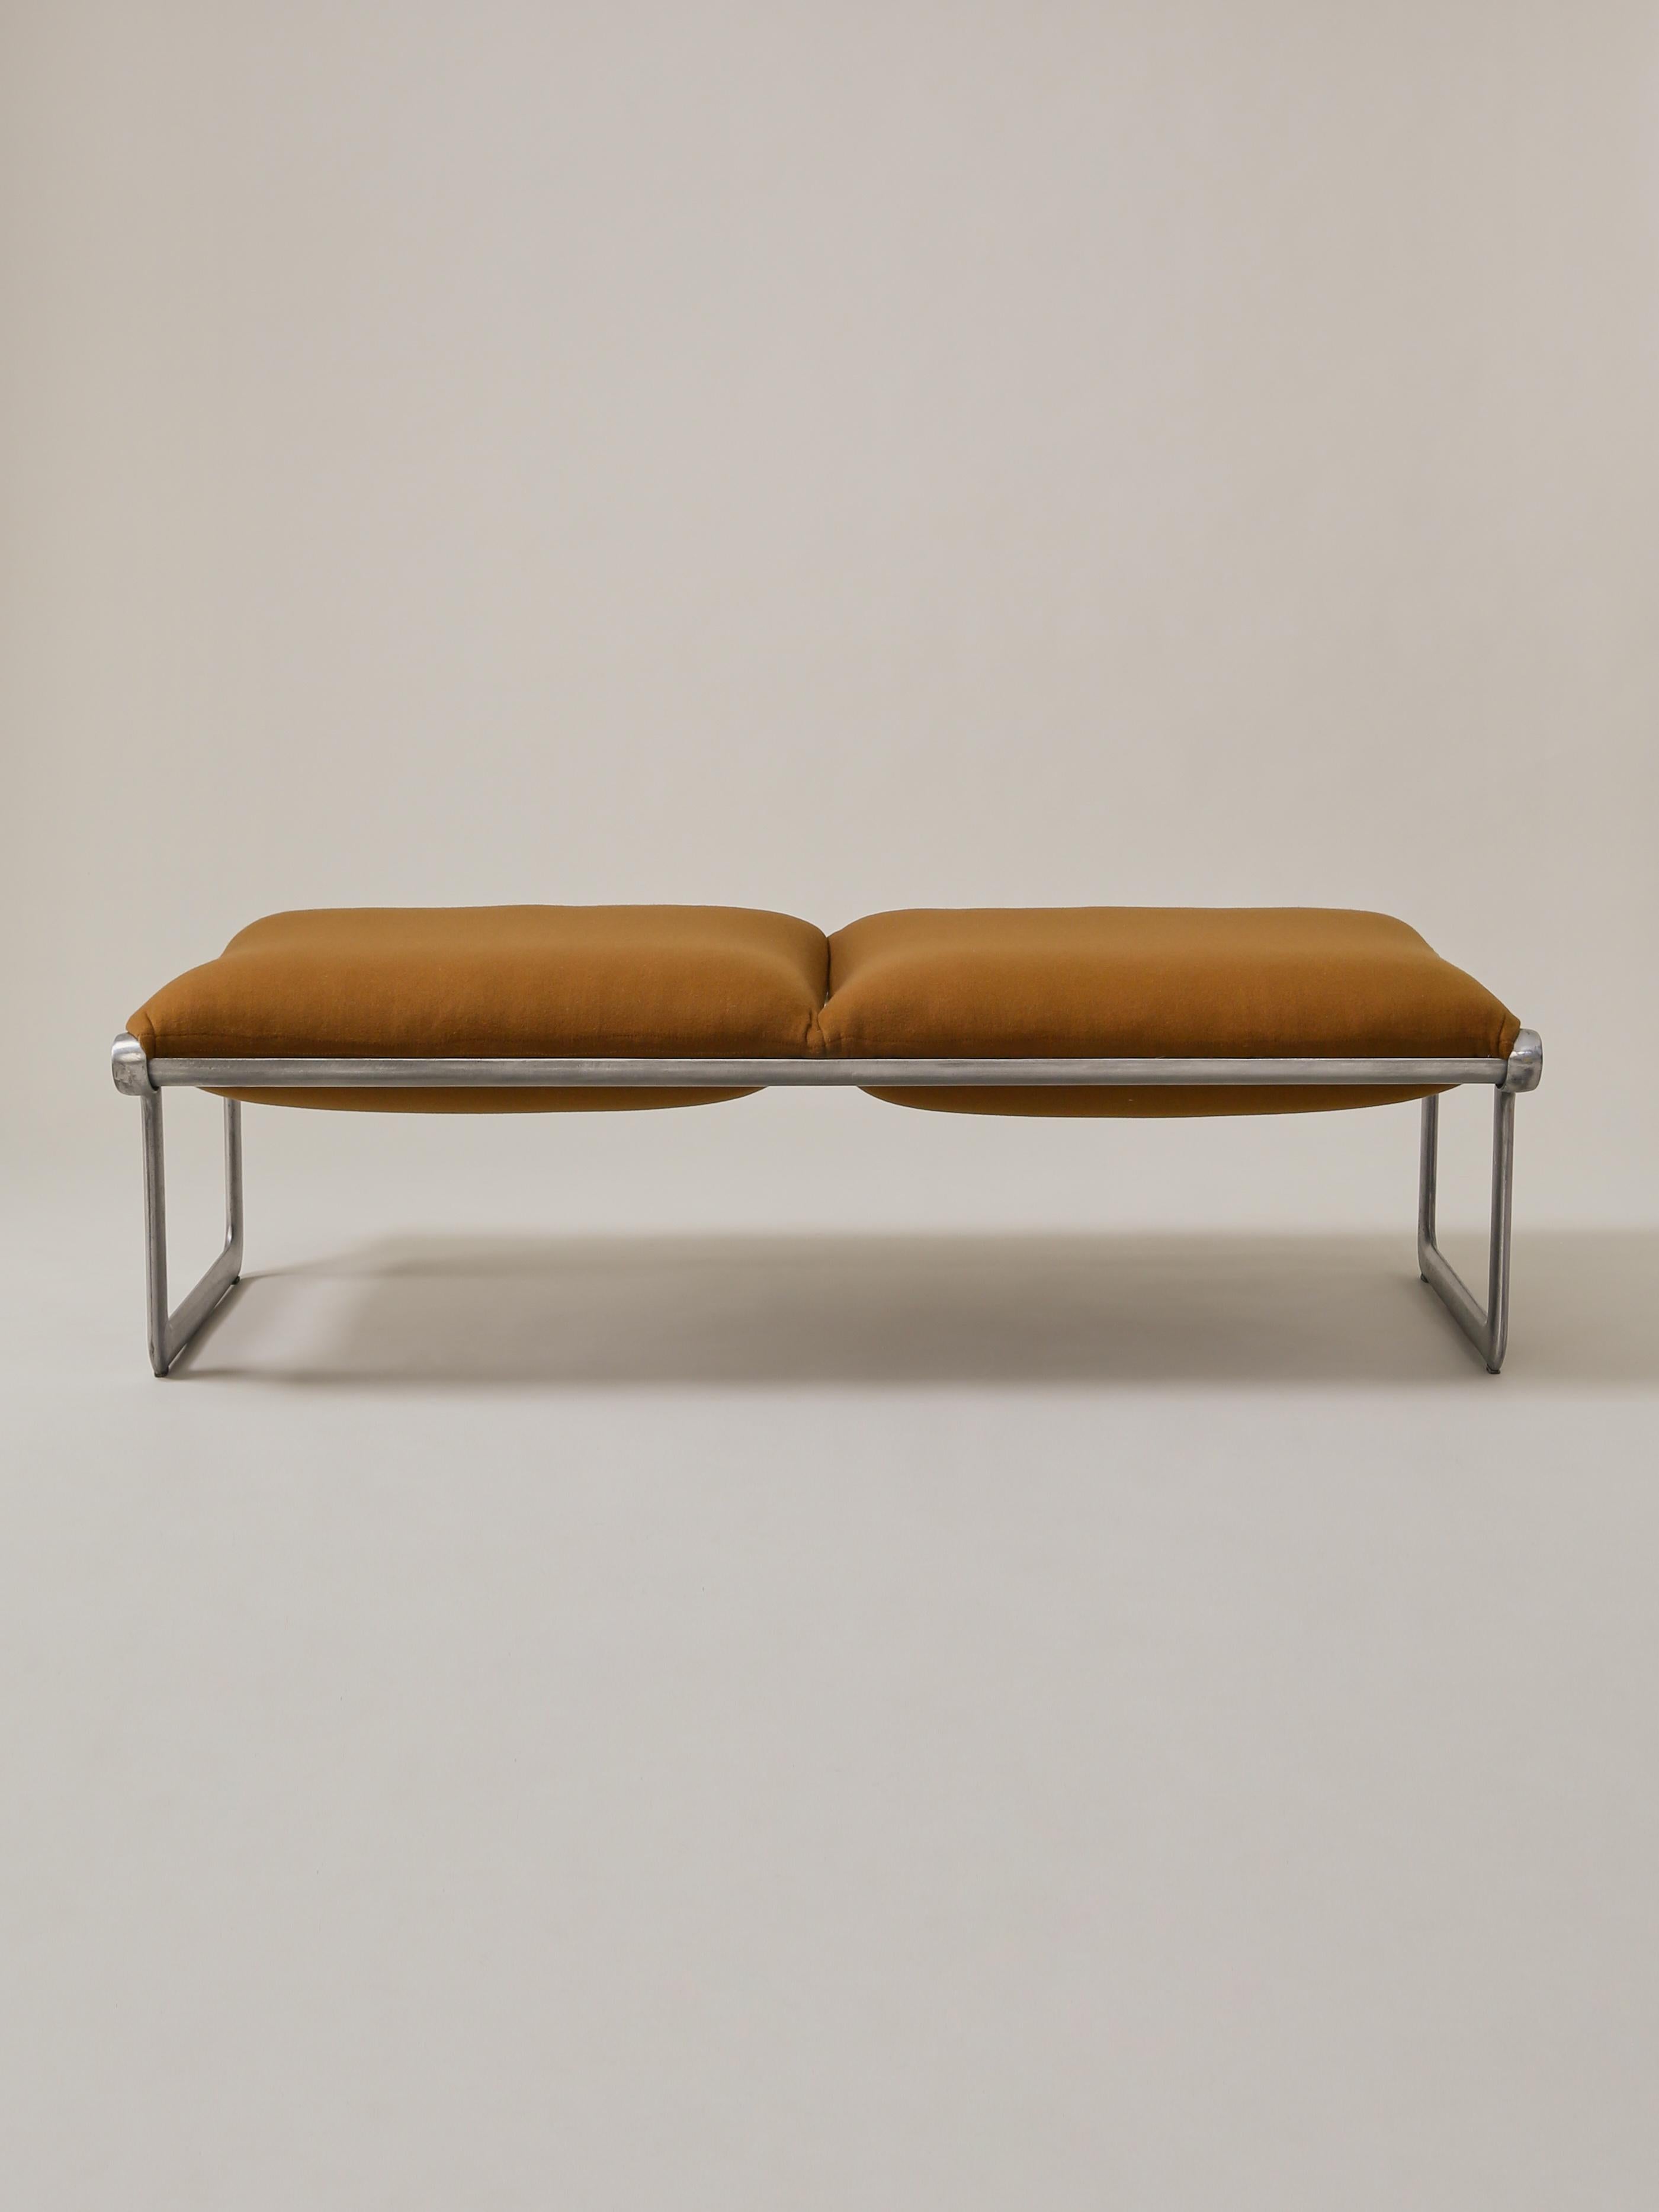 This Mid-Century Modern sling bench, designed by Bruce Hannah and Andrew Morrison for Knoll during the 1970s, features two seats, reupholstered in a bronze cashmere. The steel base is original.

Measures: Overall width: 55”
Overall depth: